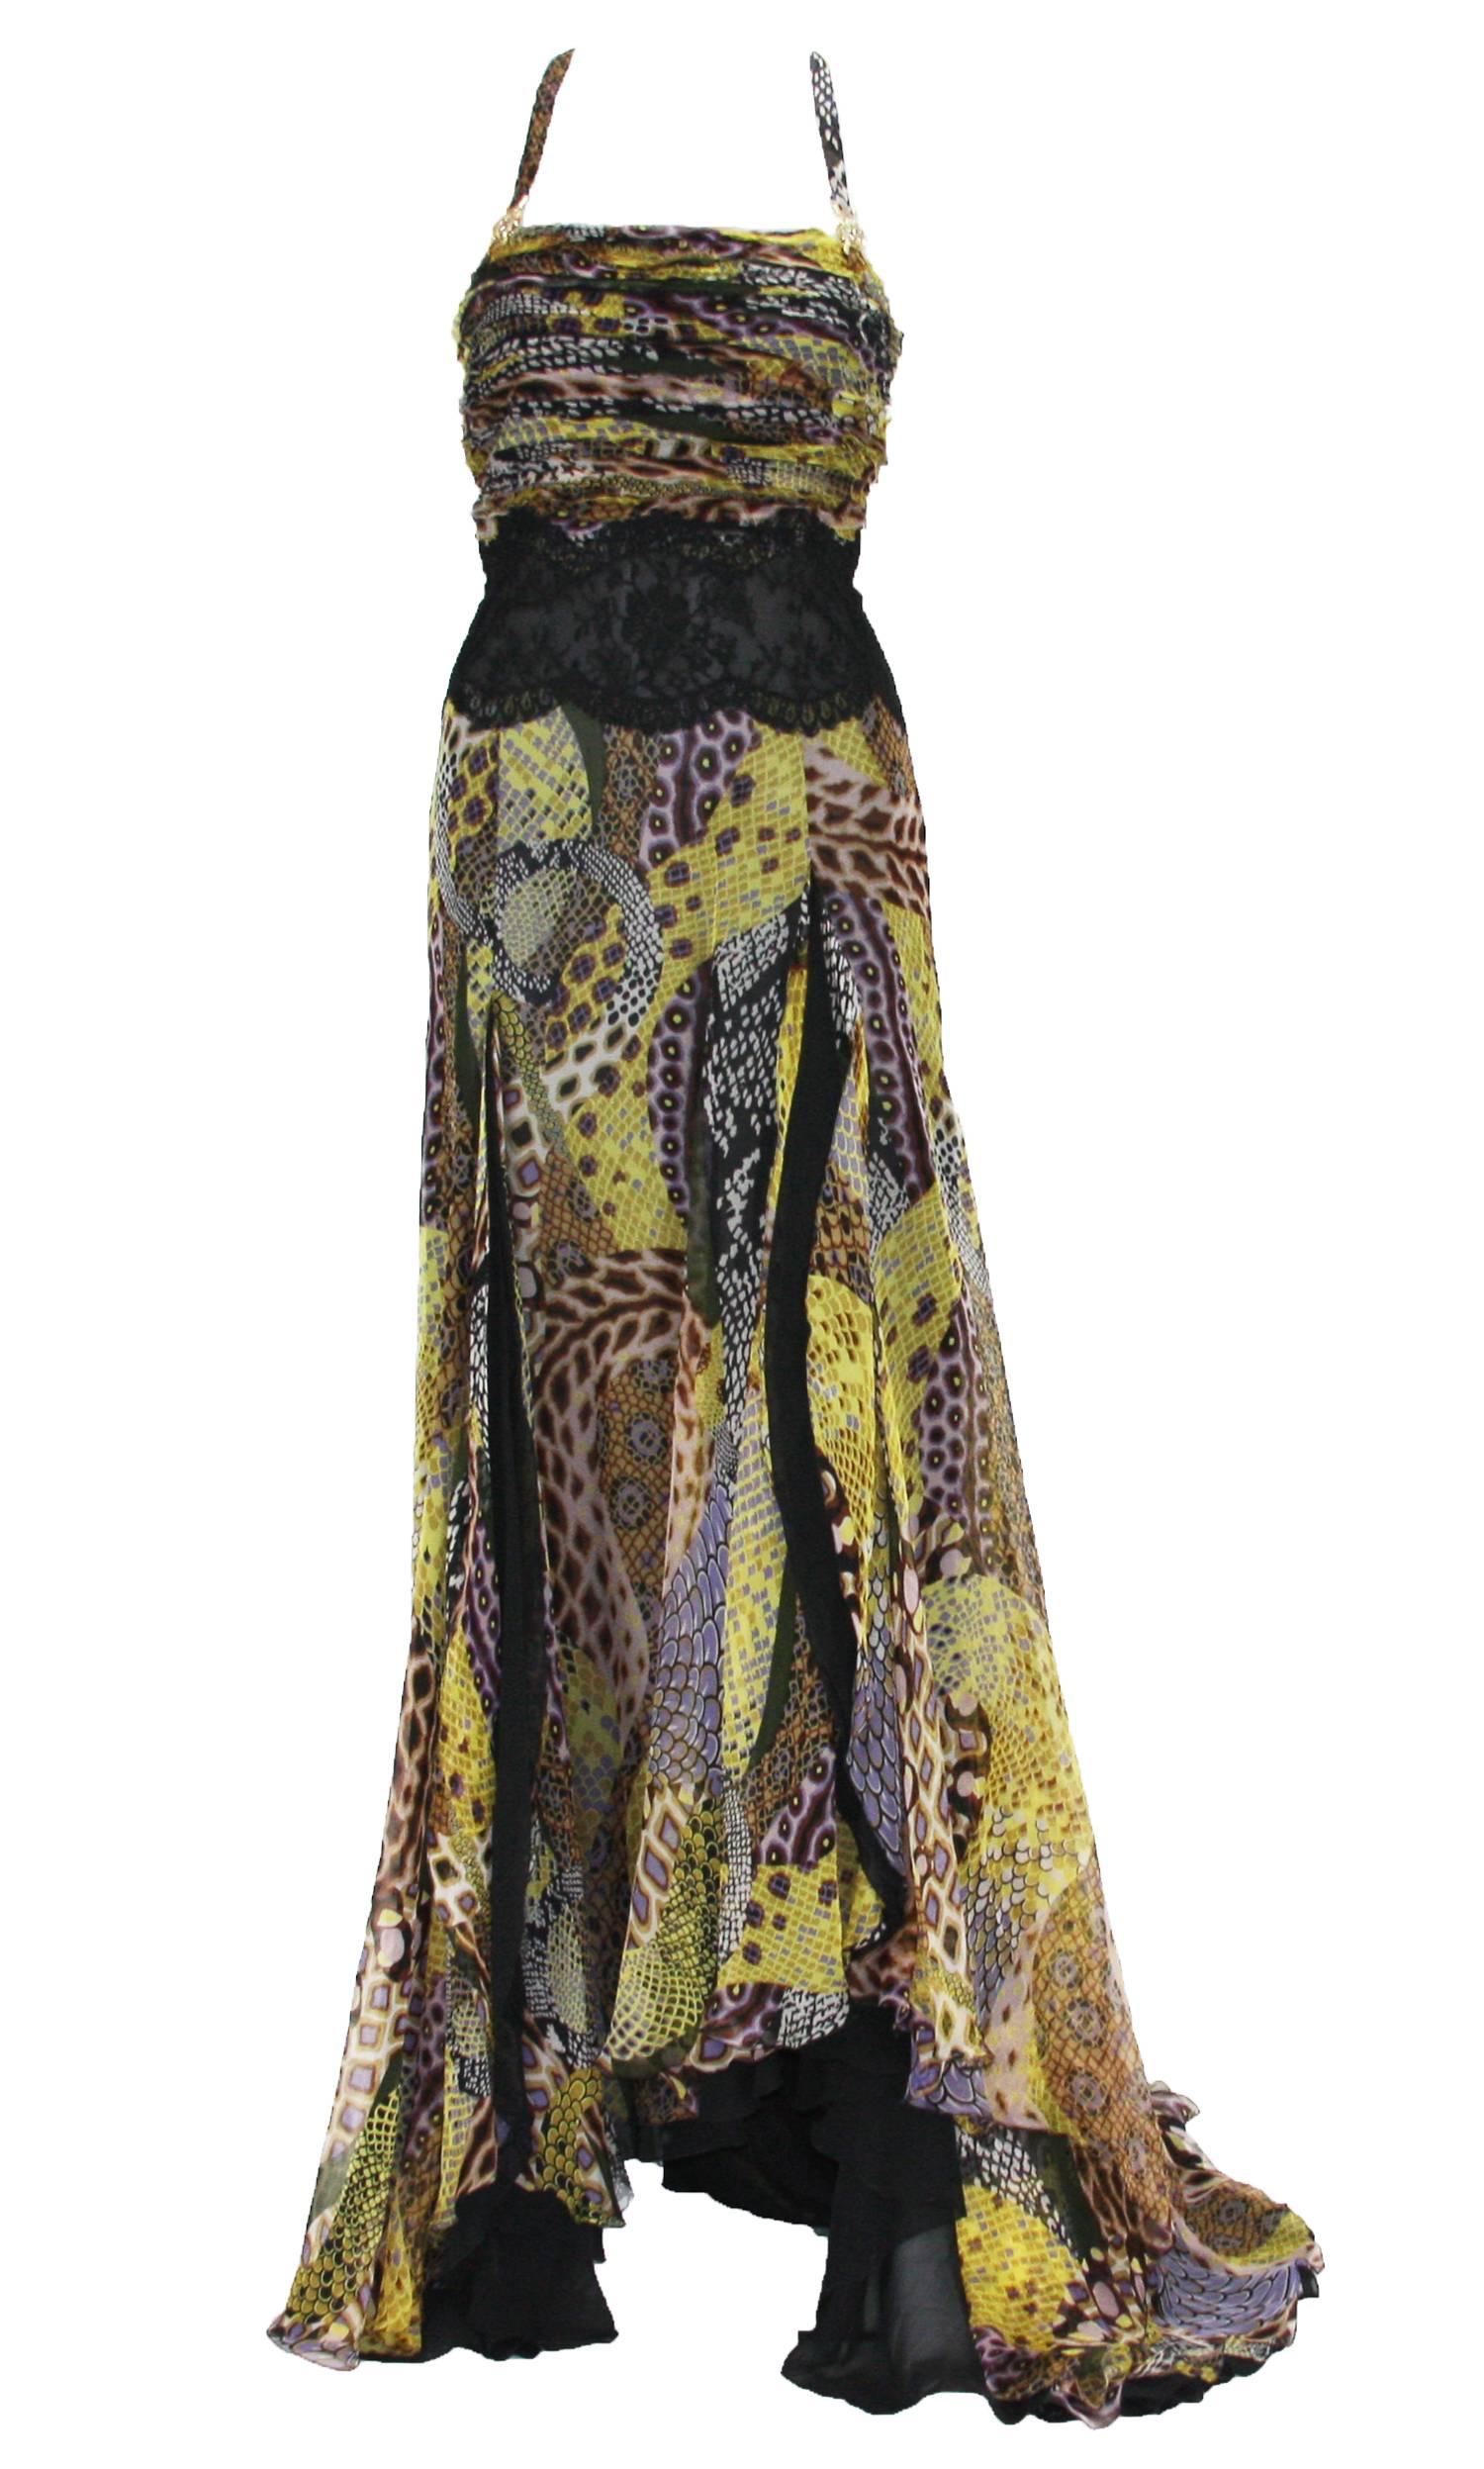 Versace 2005 Collection Silk Snake Print Dress Gown
Italian size 44 - US 8
Sheer Lace Waist, Gold Tone Metal Medusa Decoration
Fully Lined in Black Silk, Side Zip Closure
Two Front Sexy Splits to Show-off Beautiful Legs
Measurements: Length - front